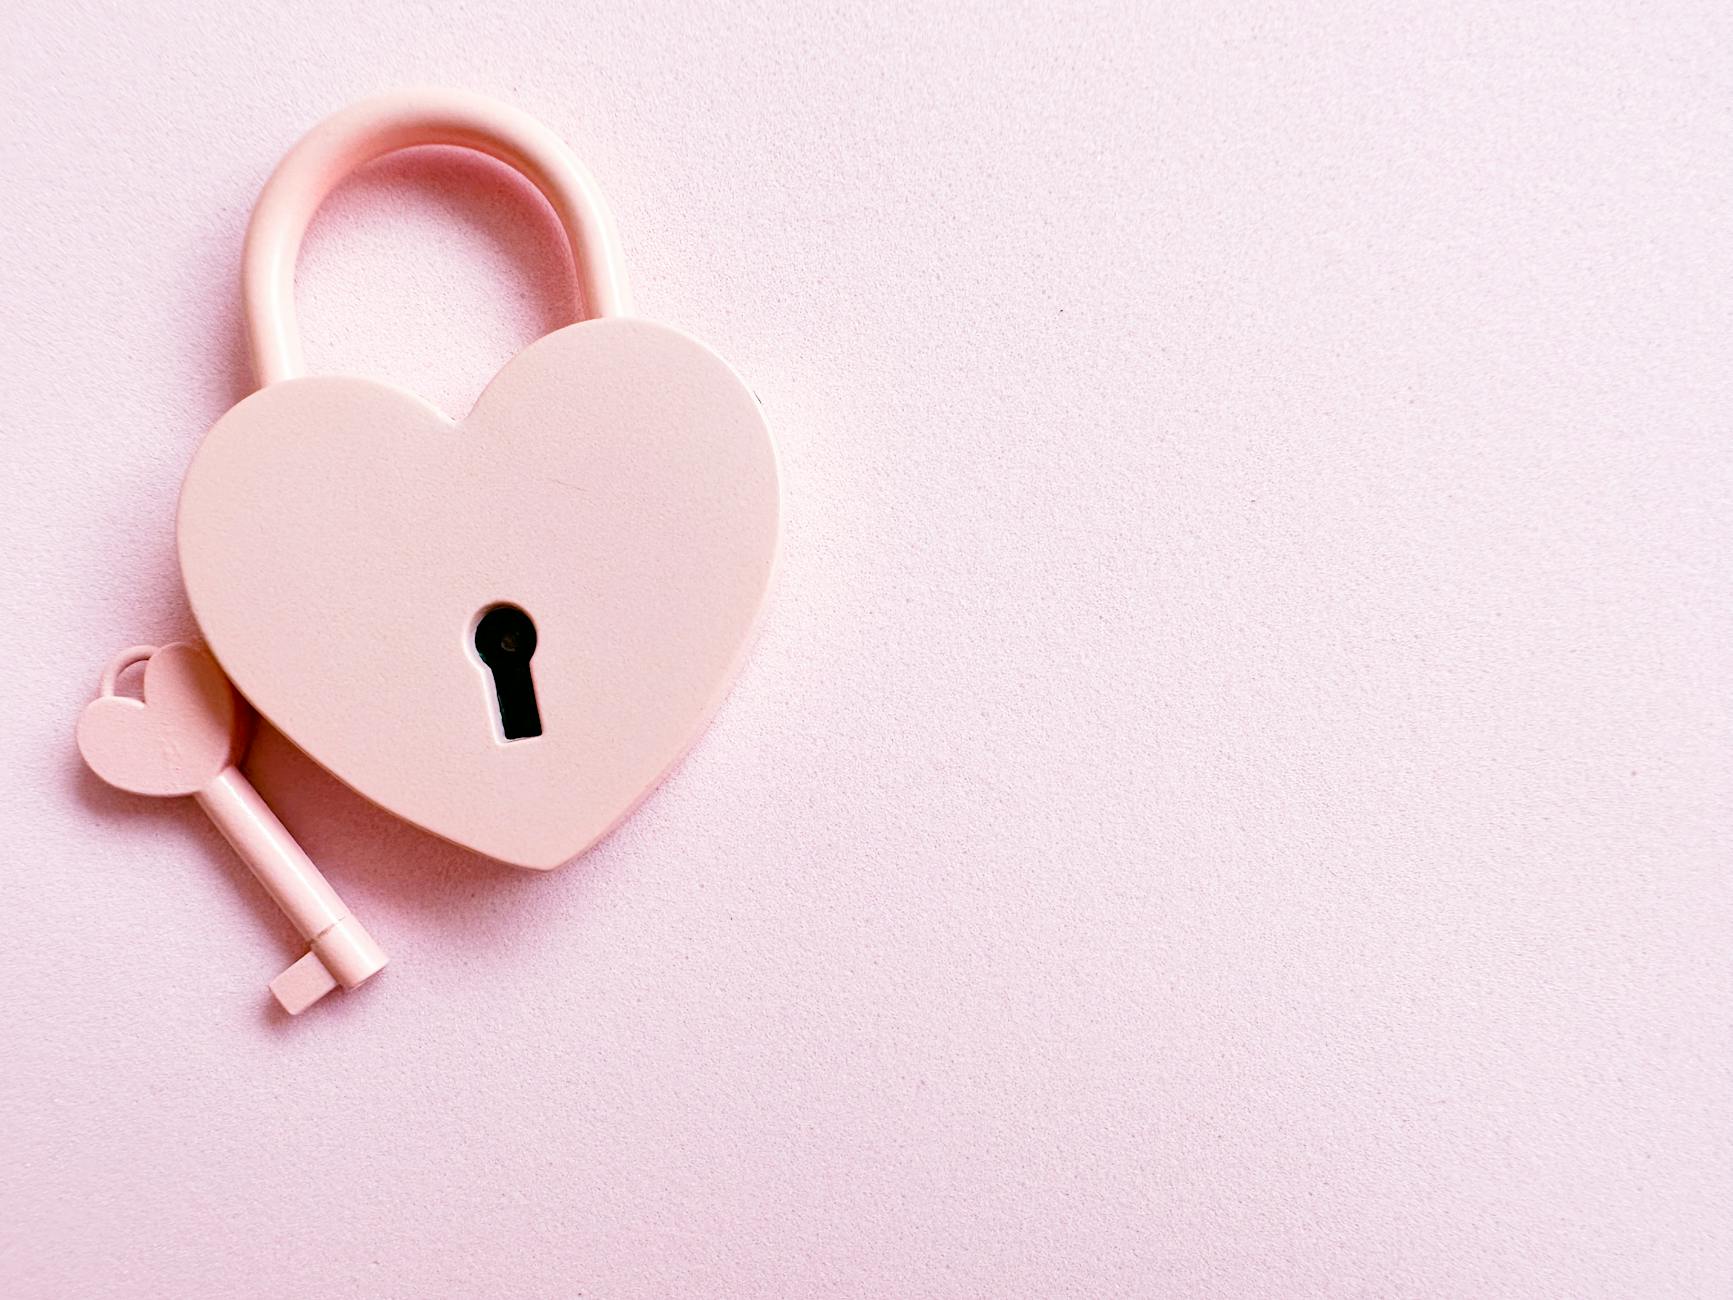 Photo of a Pink Heart Shaped Padlock and a Key